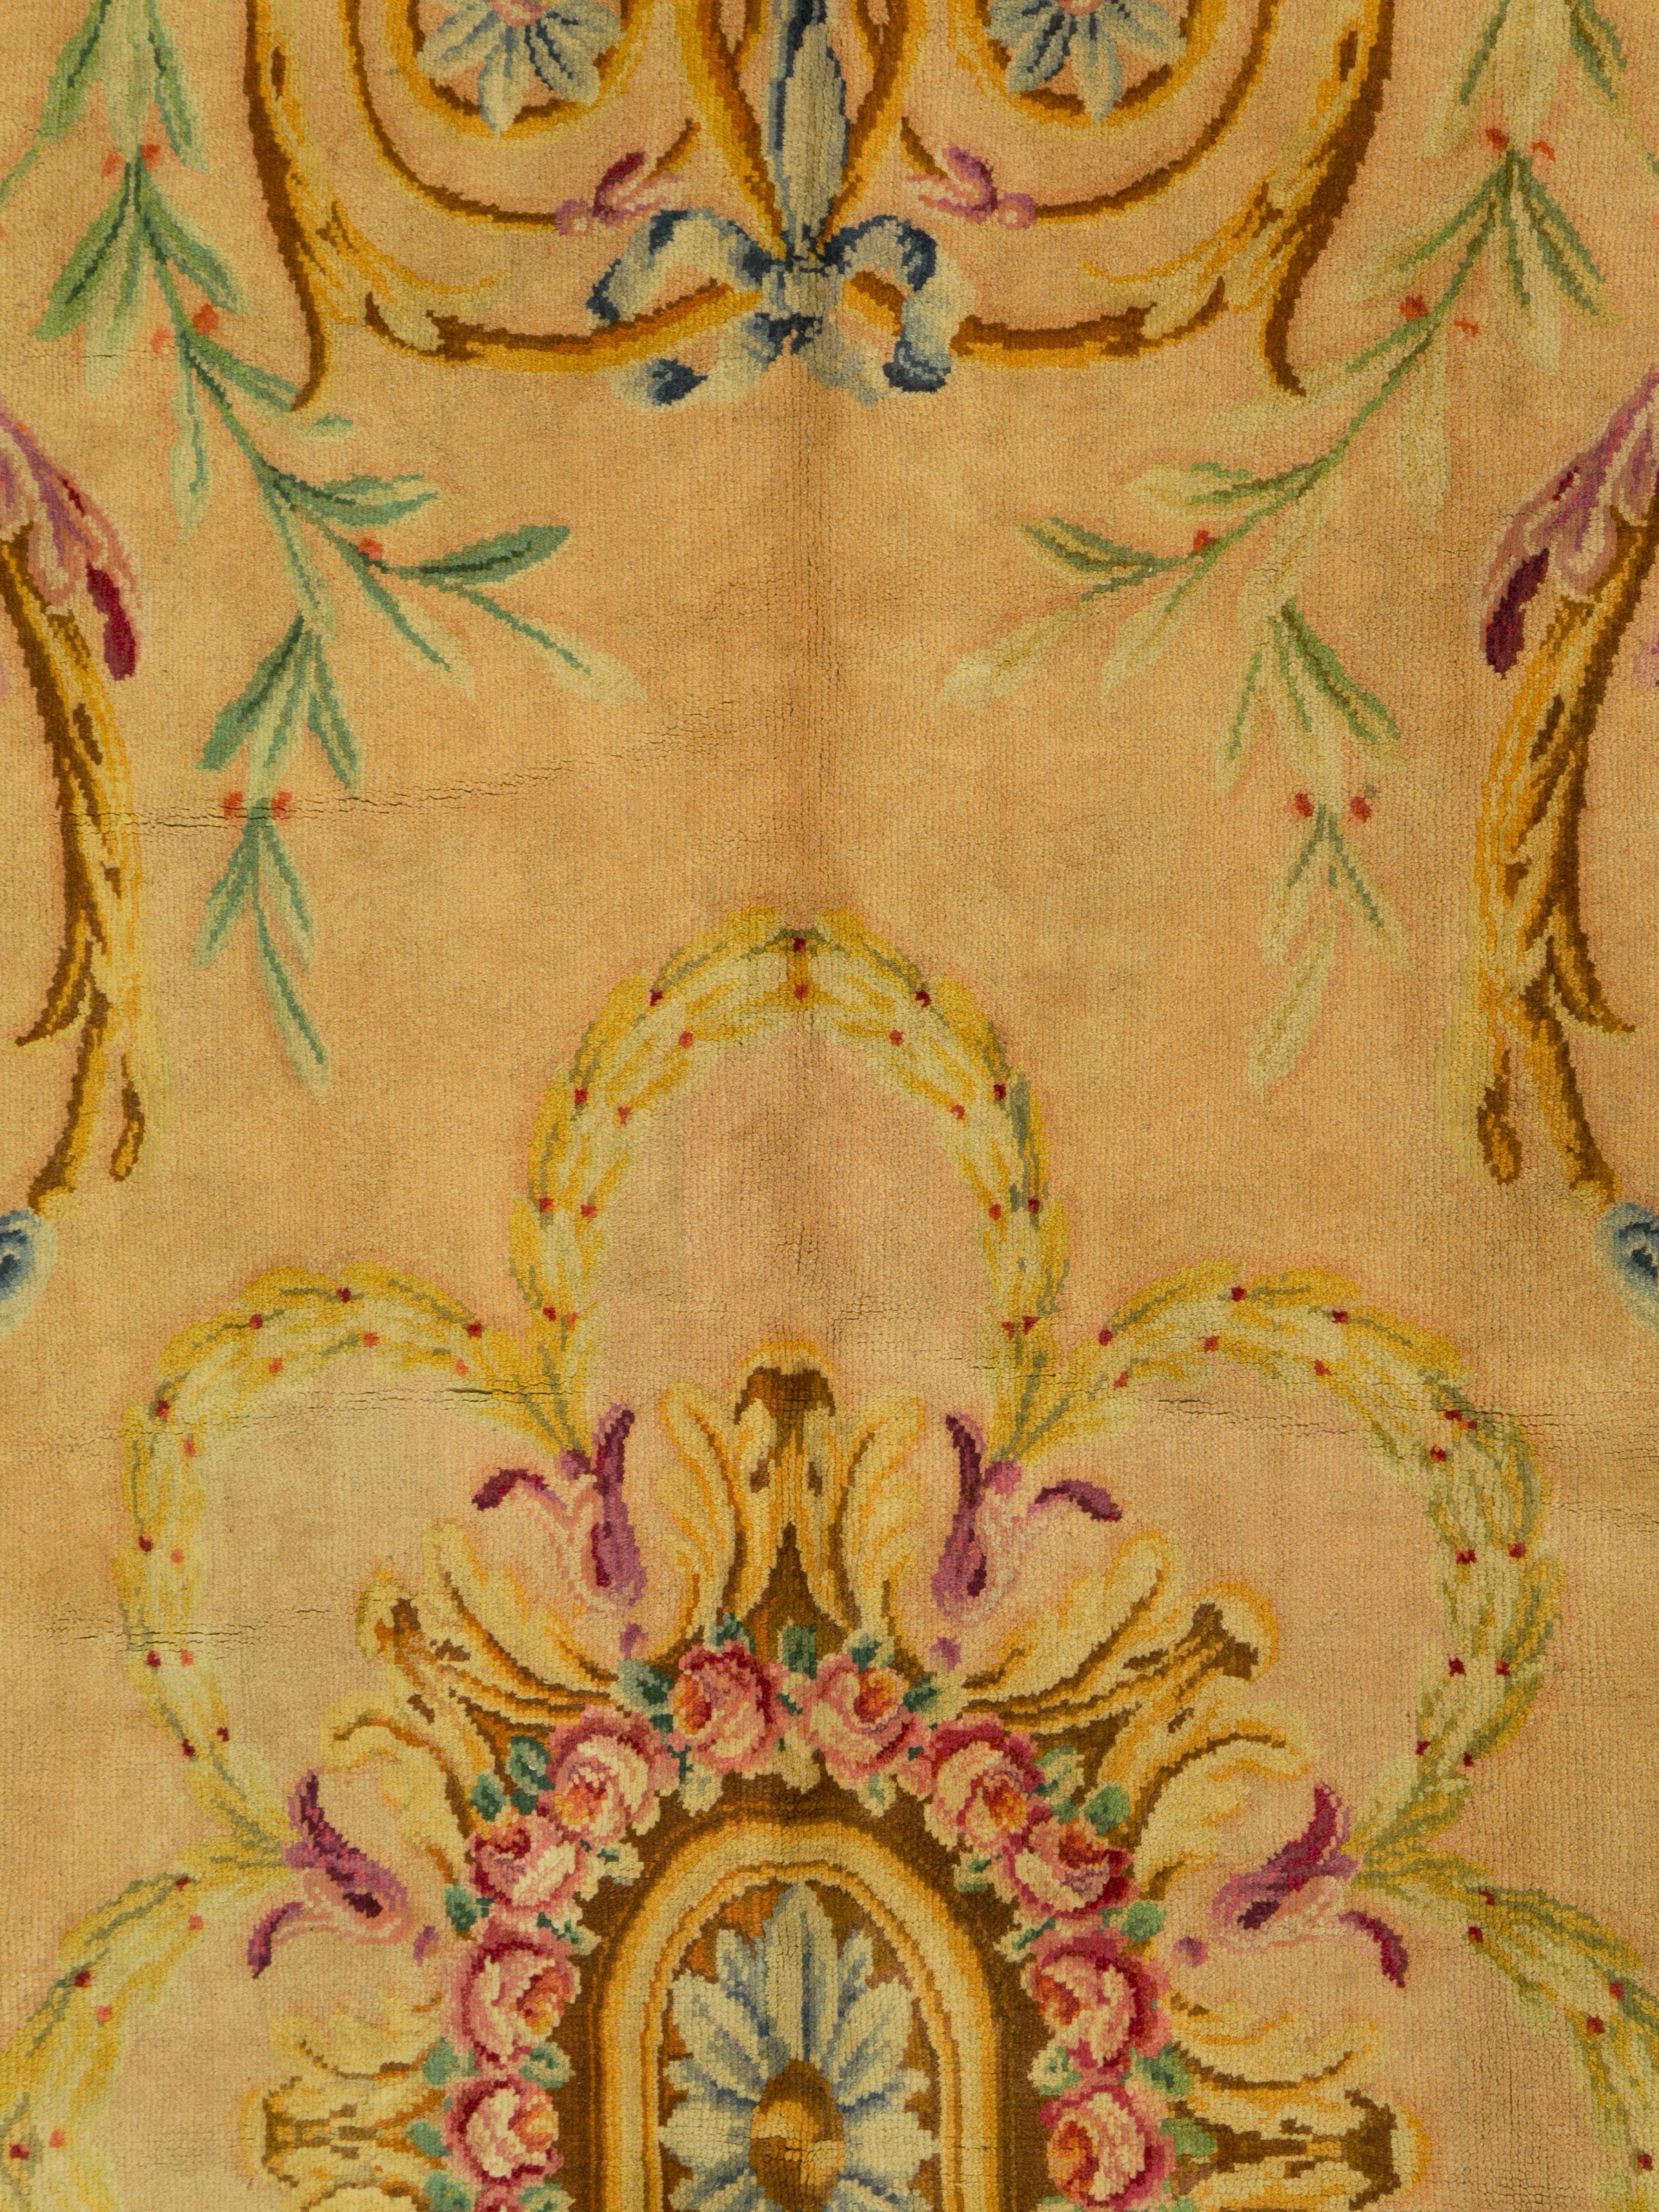 An antique French Savonnerie carpet from the early 20th century.

Measures: 9' 7